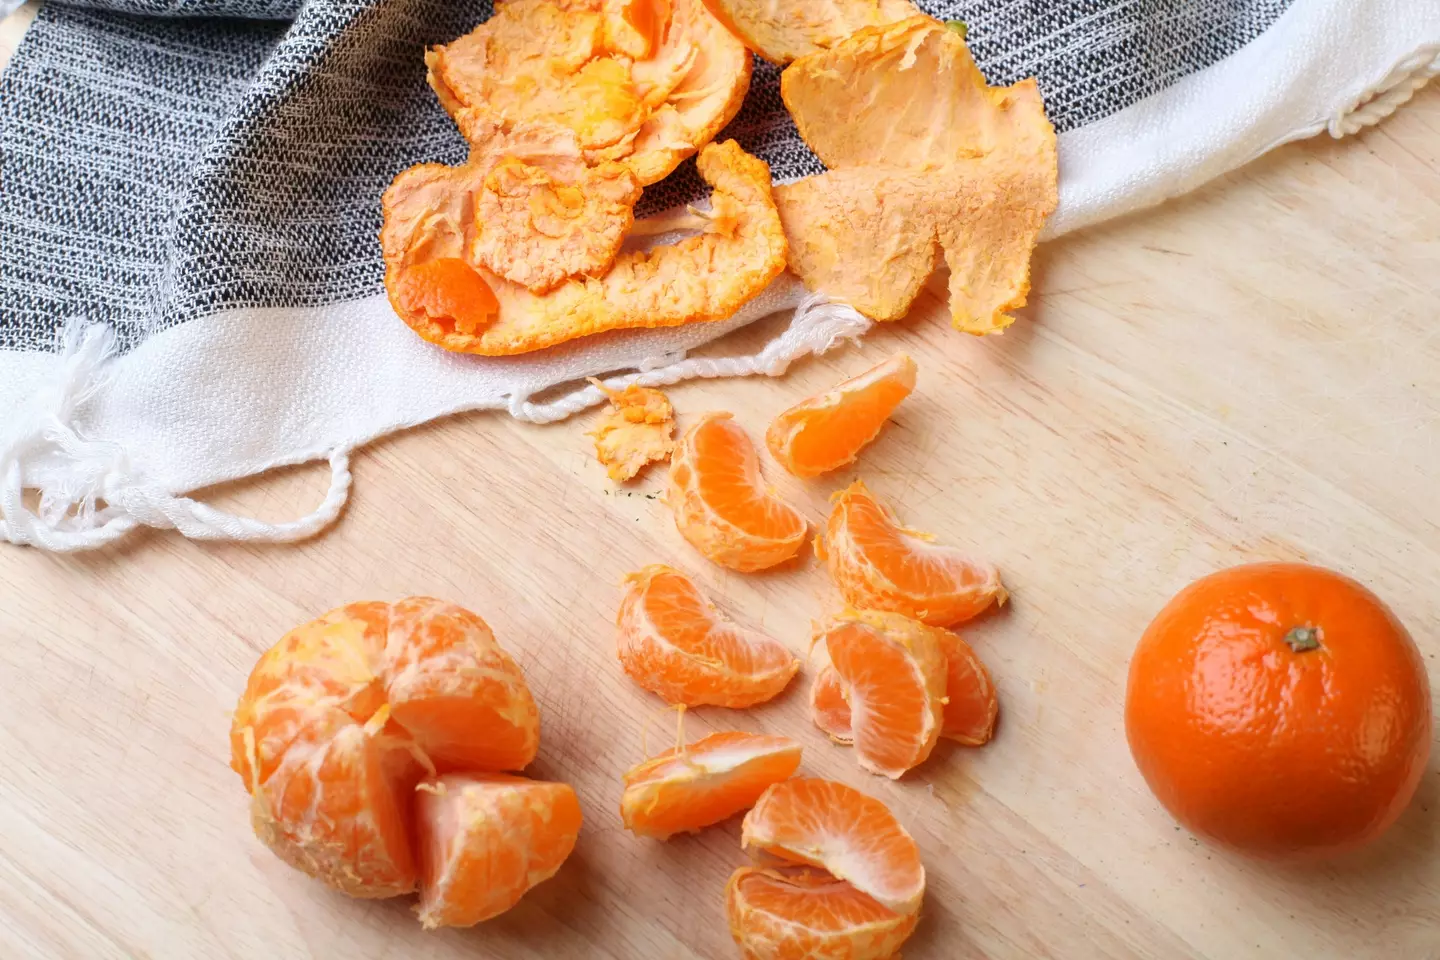 The 'orange peel theory' involves checking to see if your partner is happy to do small things to help you out i.e. peeling an orange for you.